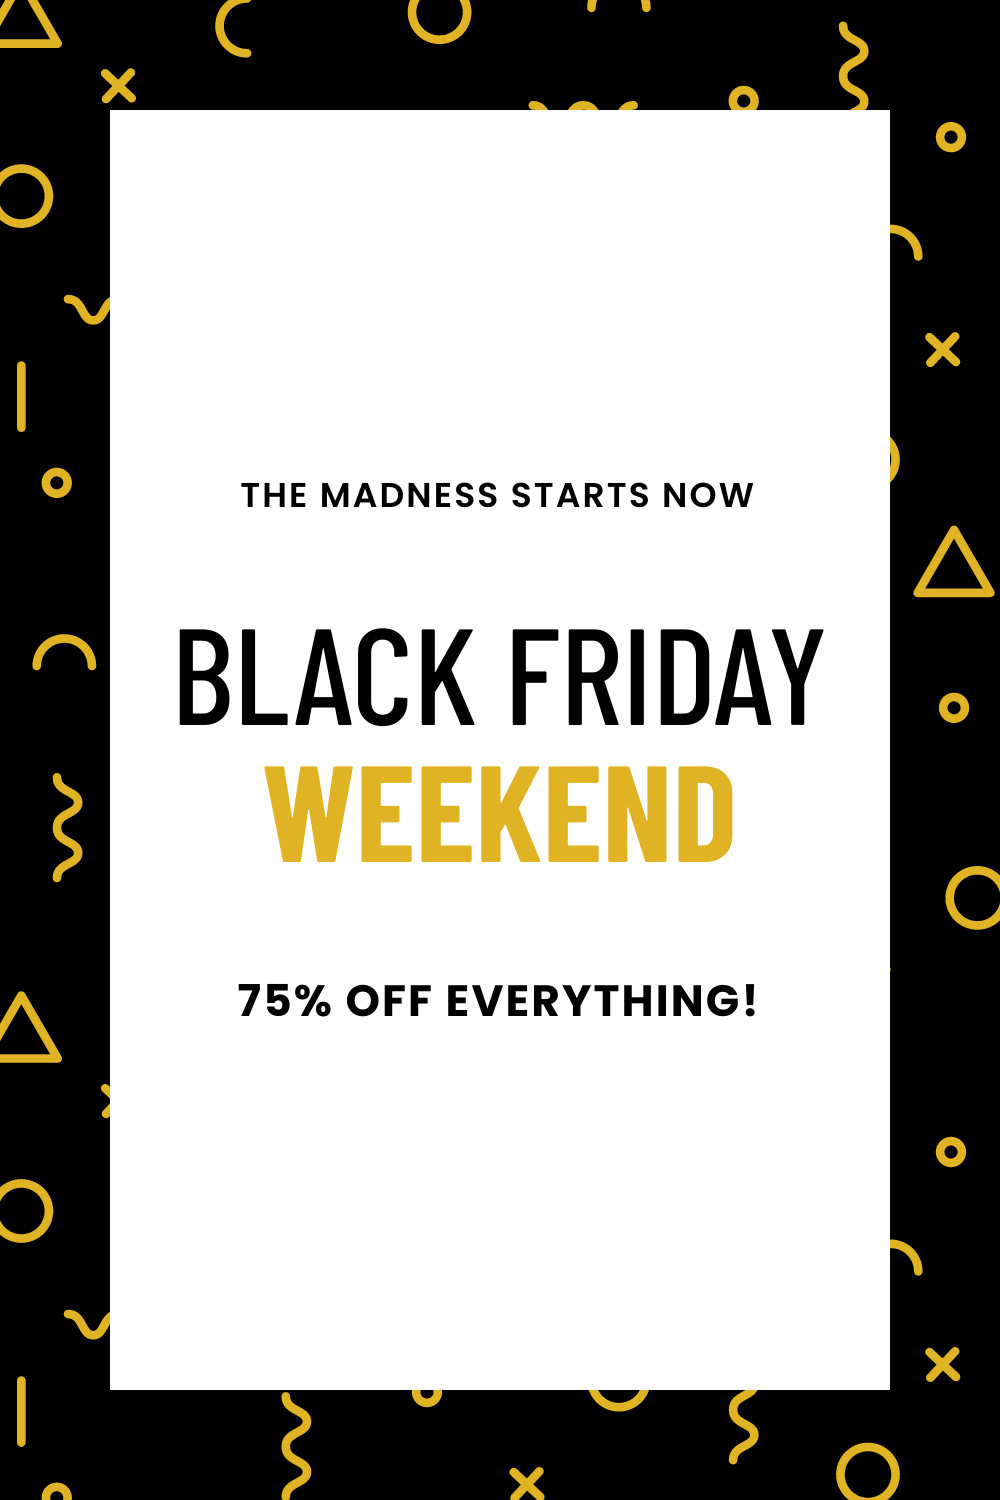 Black Friday Weekend Madness 